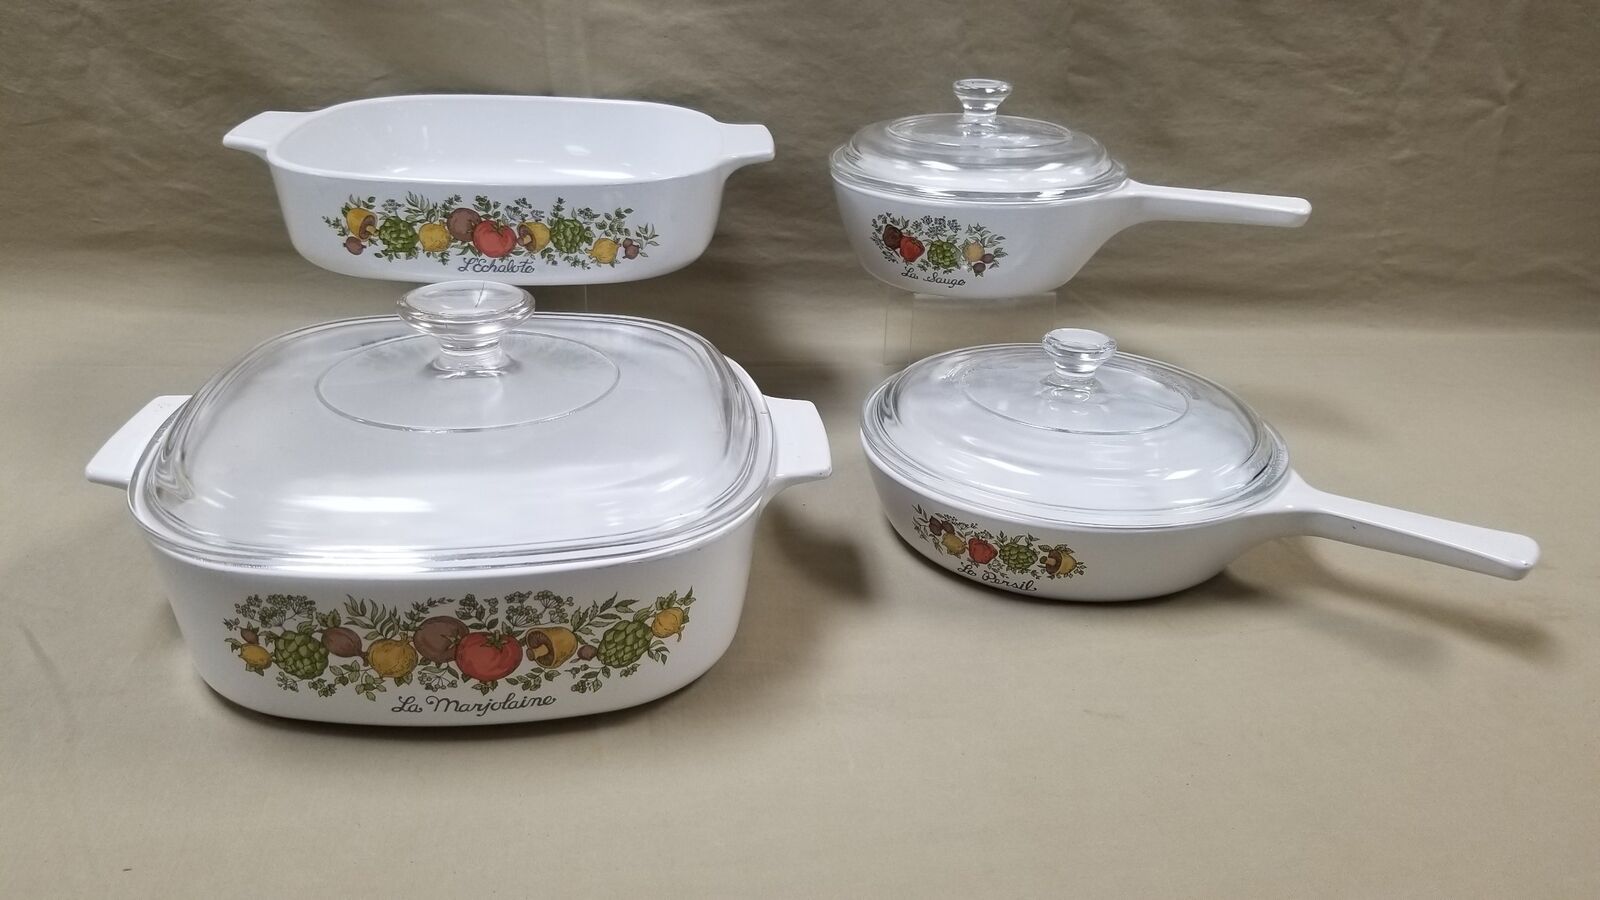 Lot of 4 Vintage Corning Ware Spice of Life Dishes Bakeware - Some w/ Lids